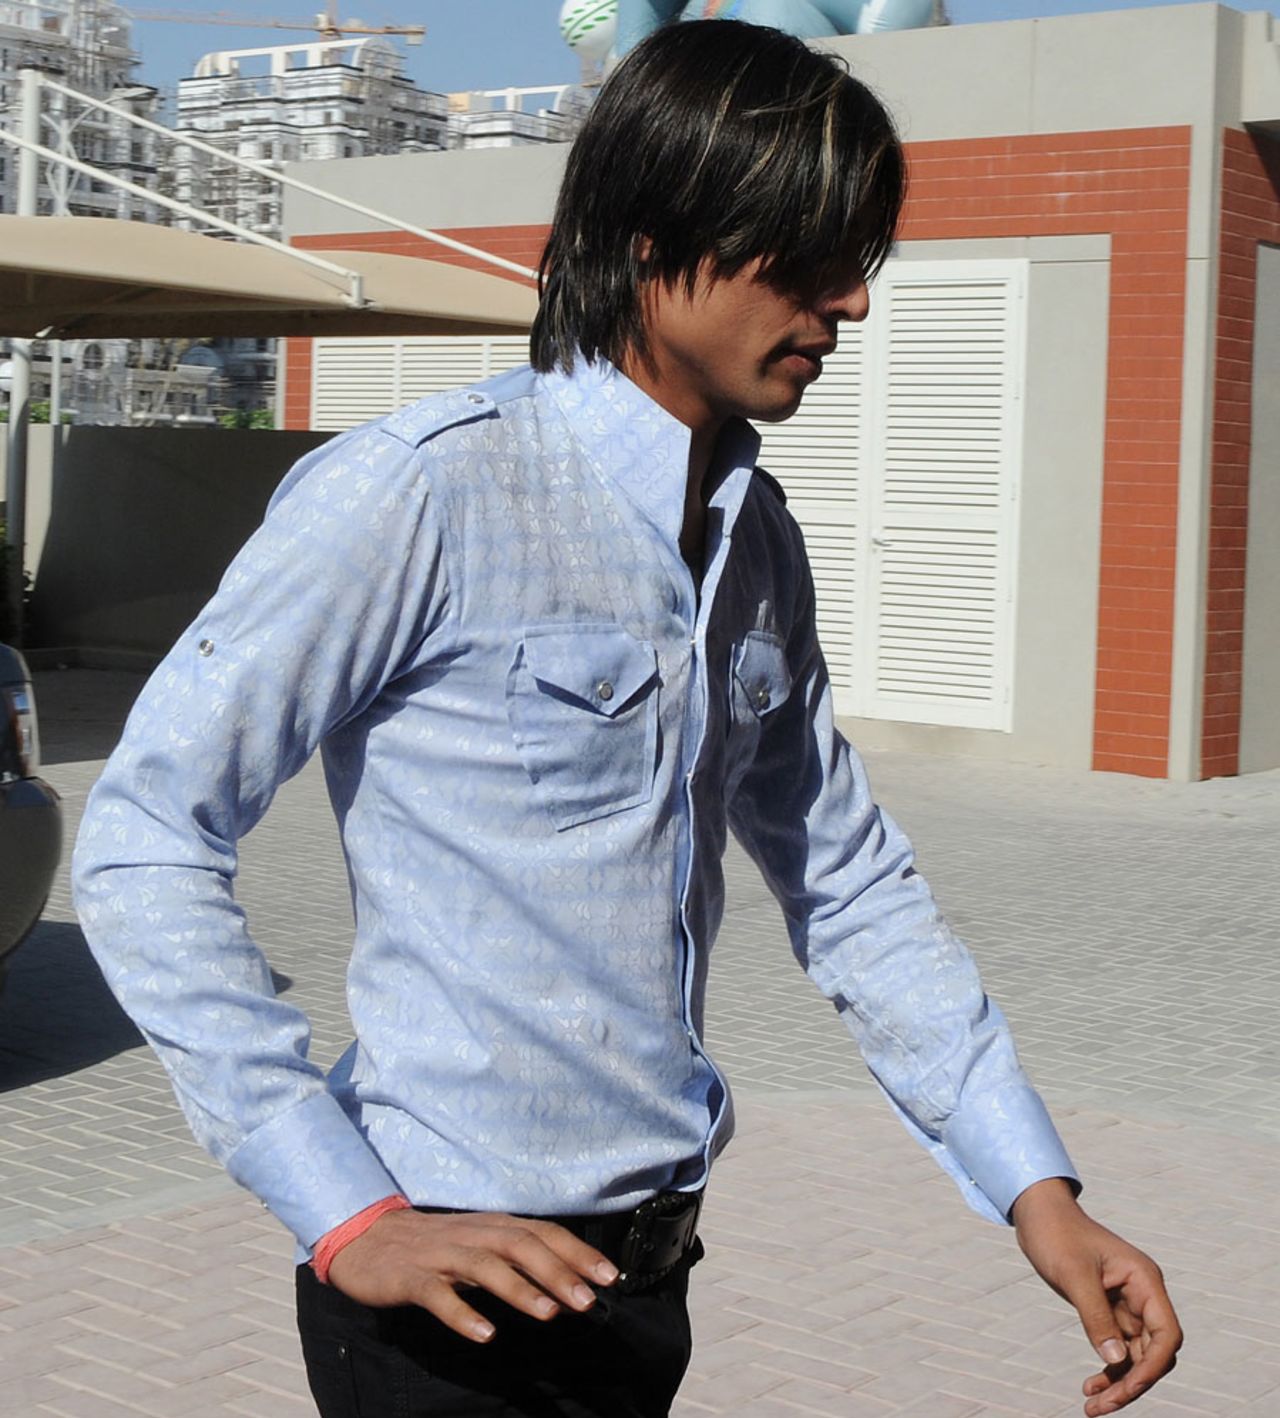 Mohammad Aamir arrives at the ICC headquarters in Dubai for the hearing on his suspension on charges of spot-fixing, Dubai, October 30, 2010